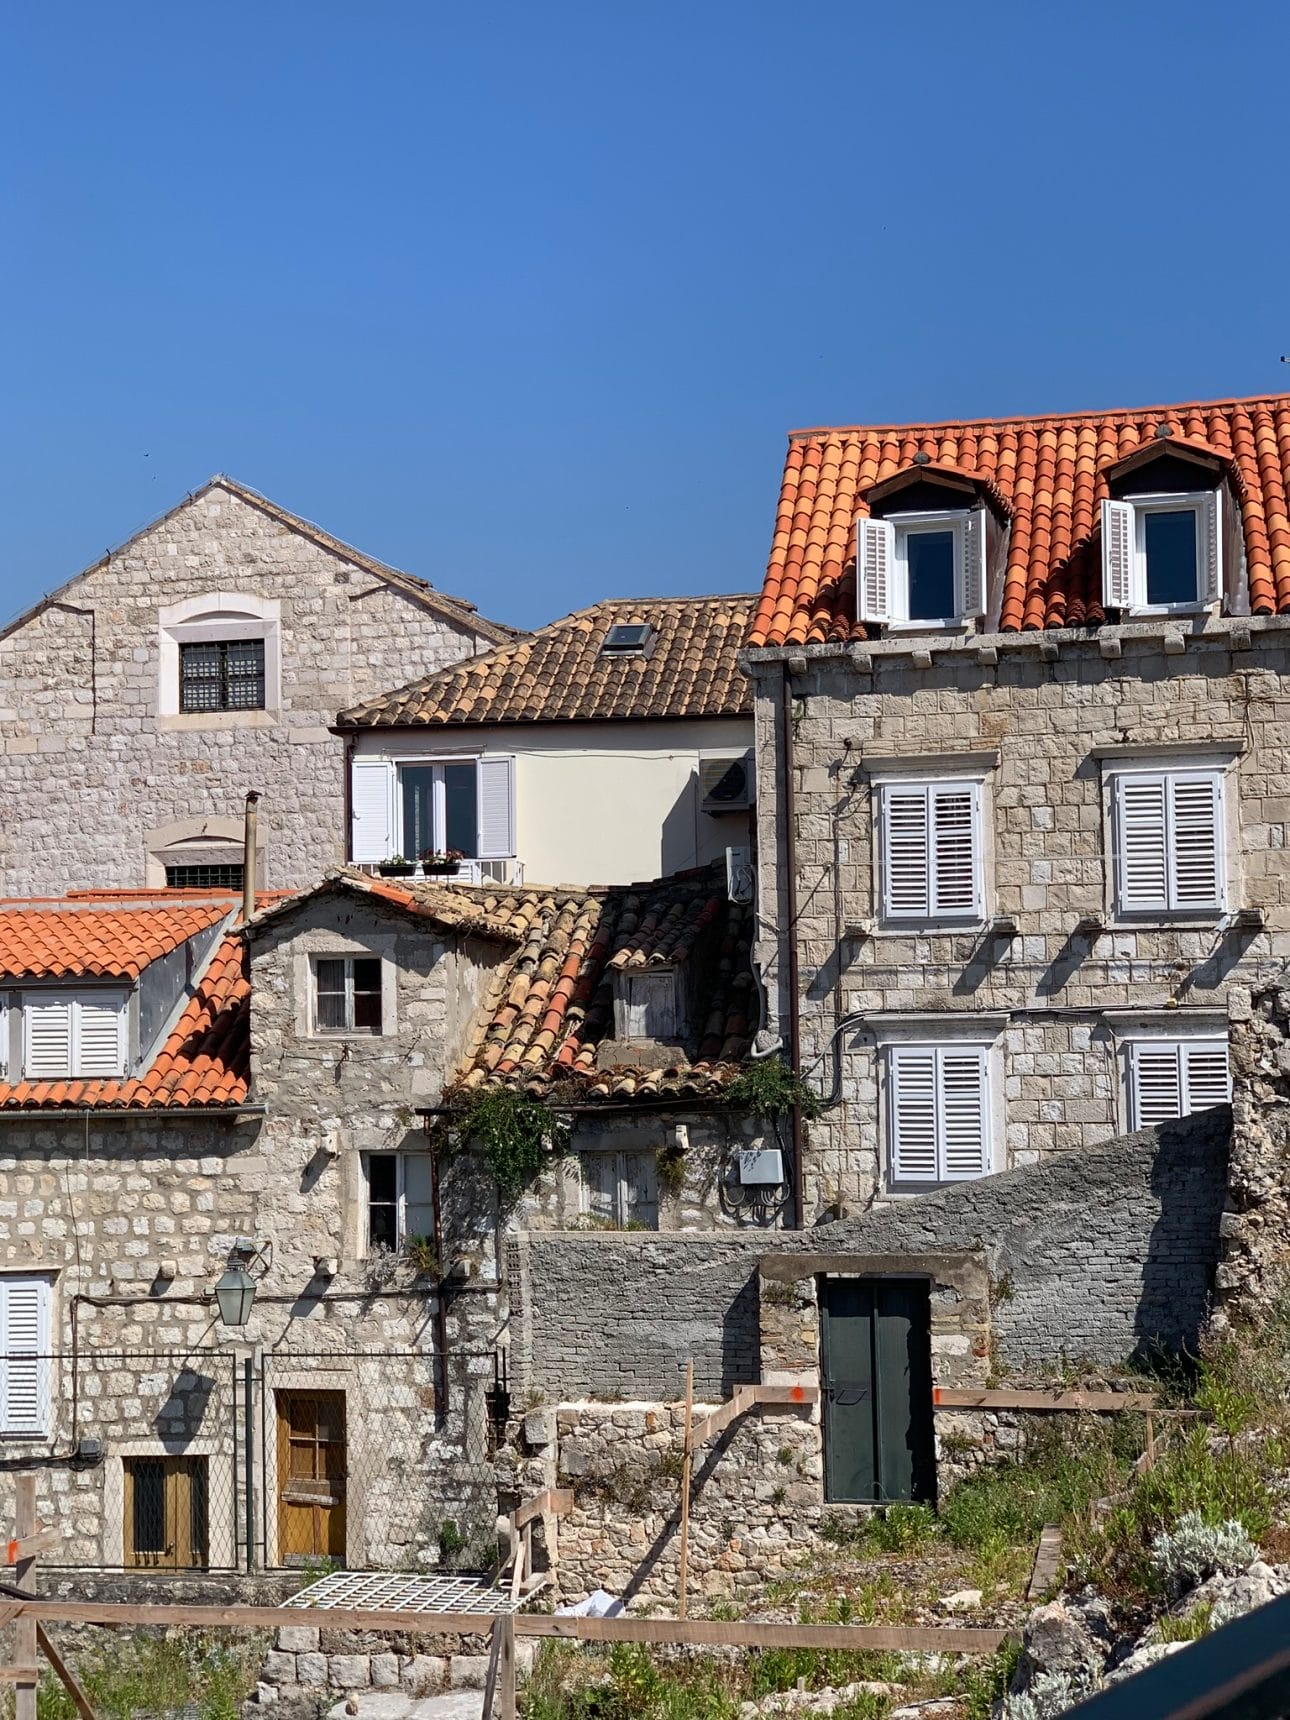 view of the roofs within the old town city walls in dubrovnik croatia